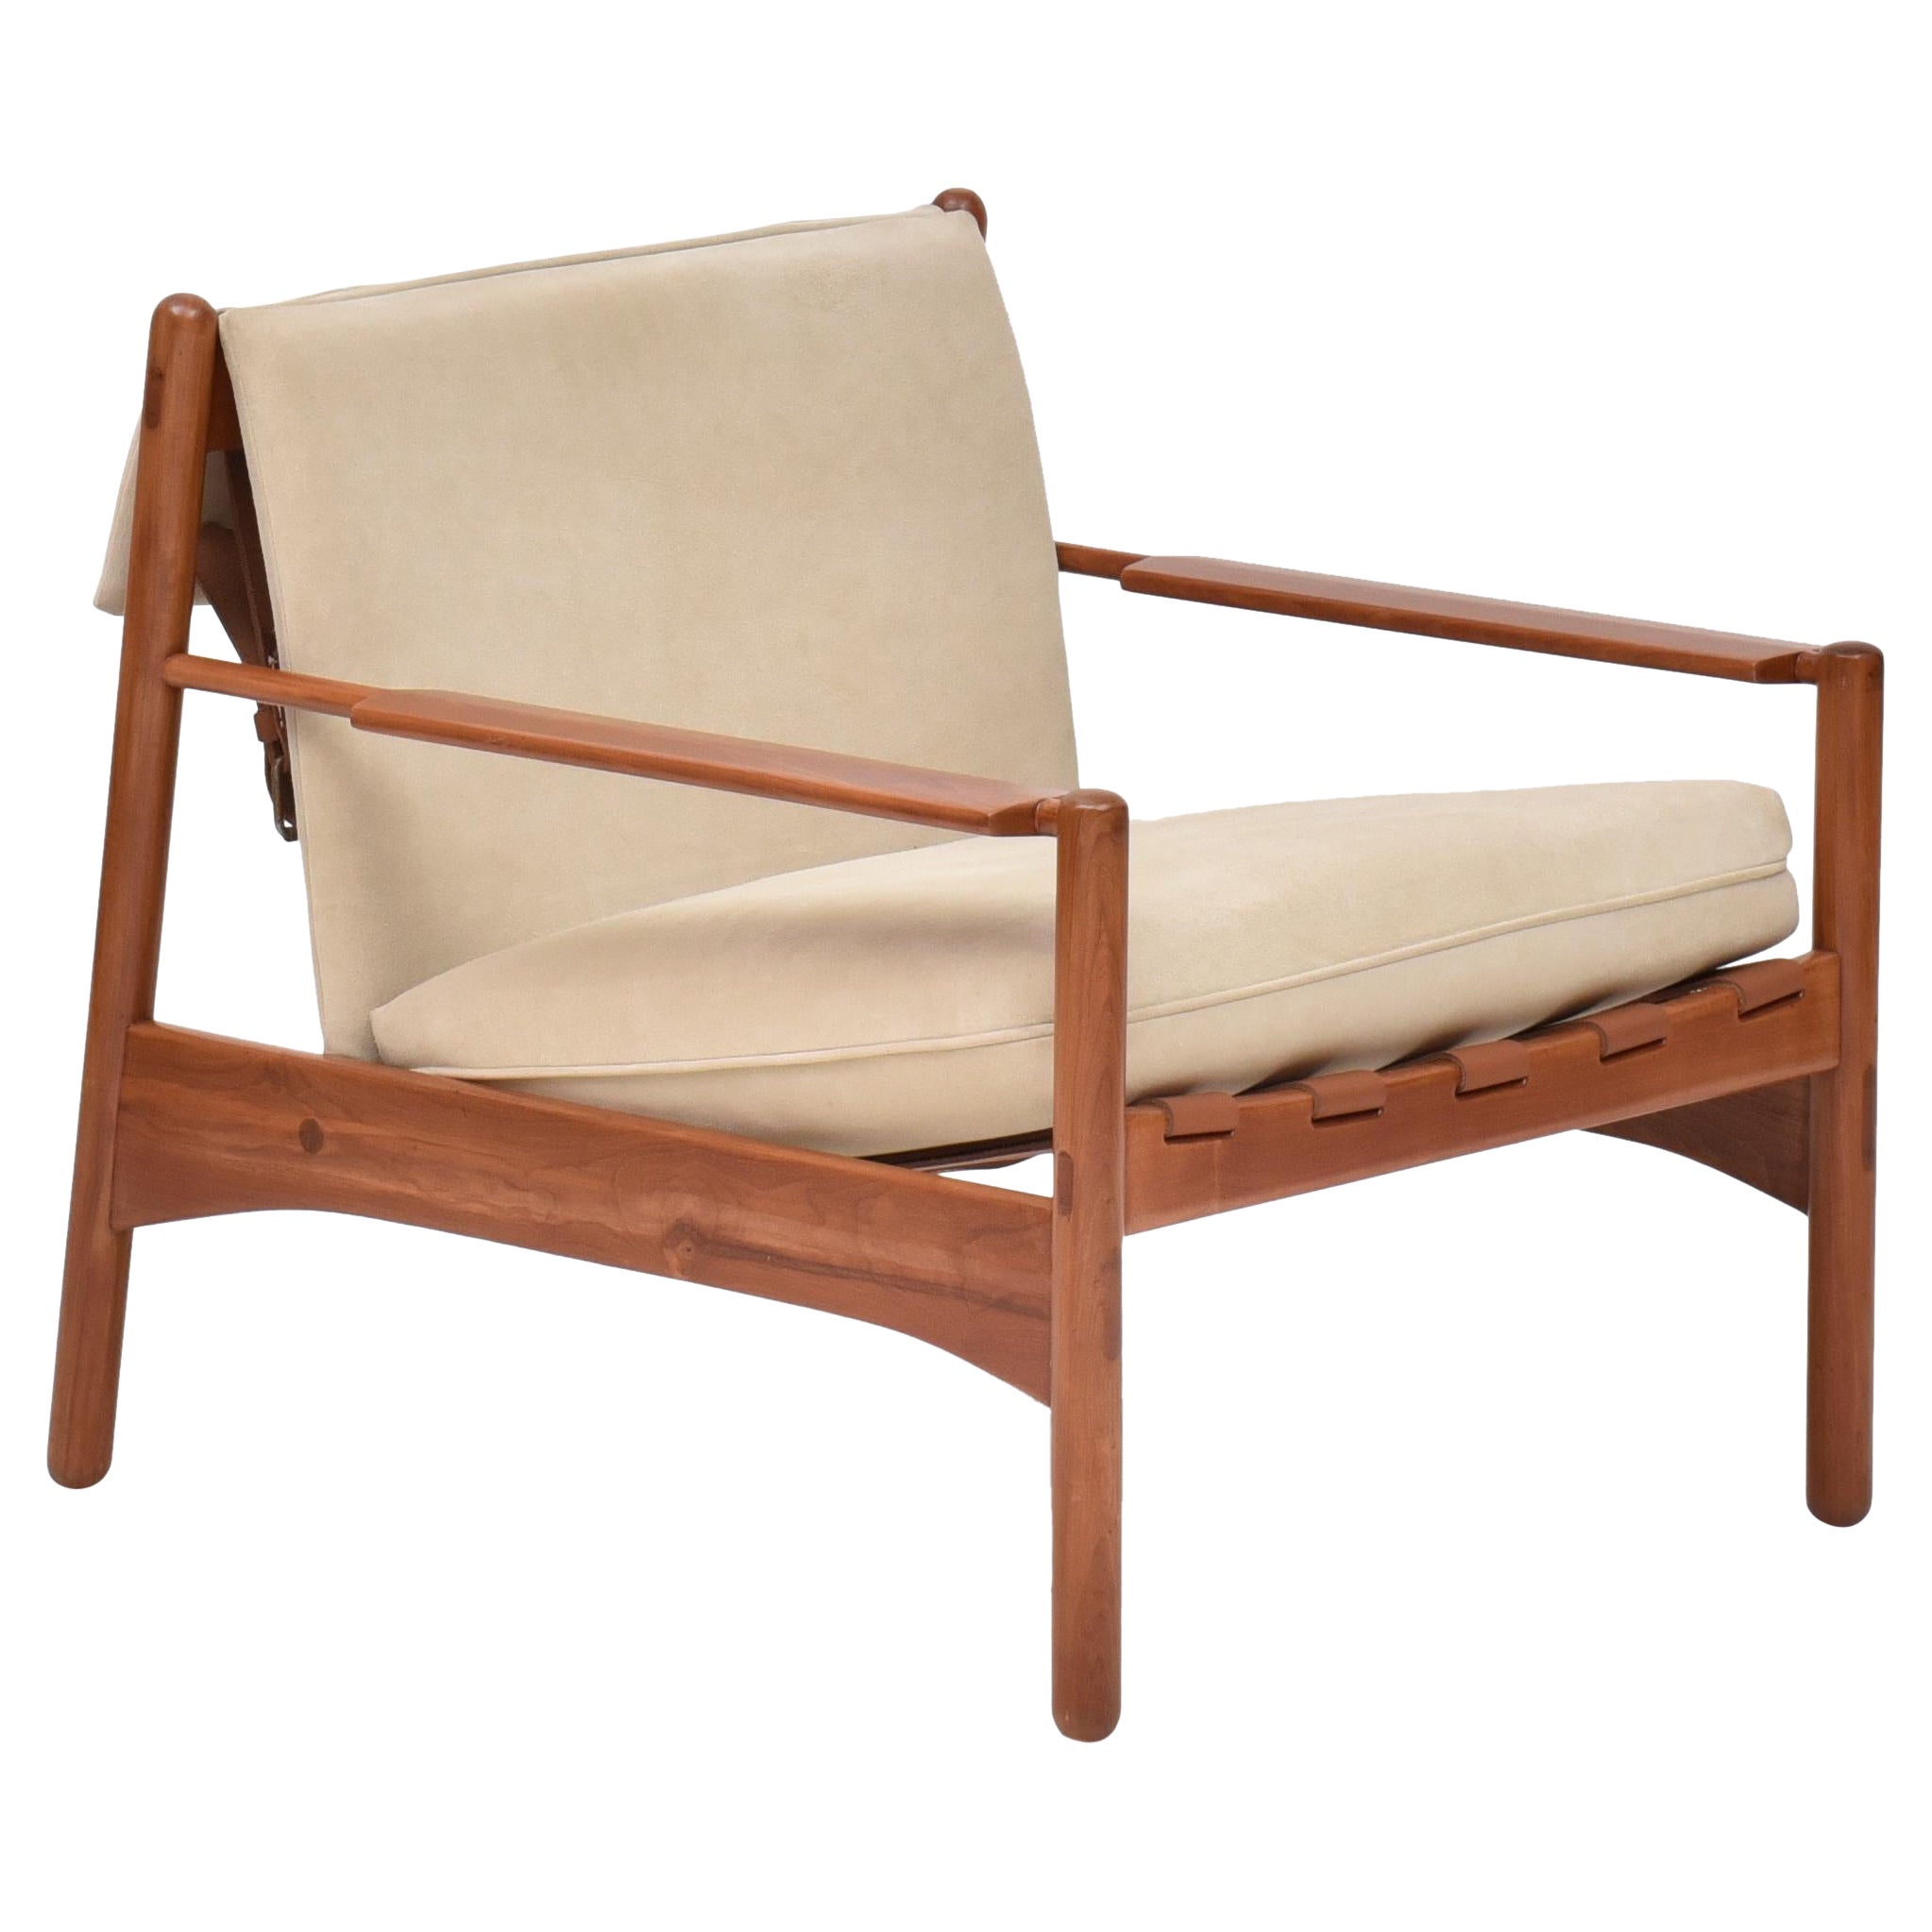 Armchair In Perobinha Do Campo with Buckles, By Arredamento For Sale